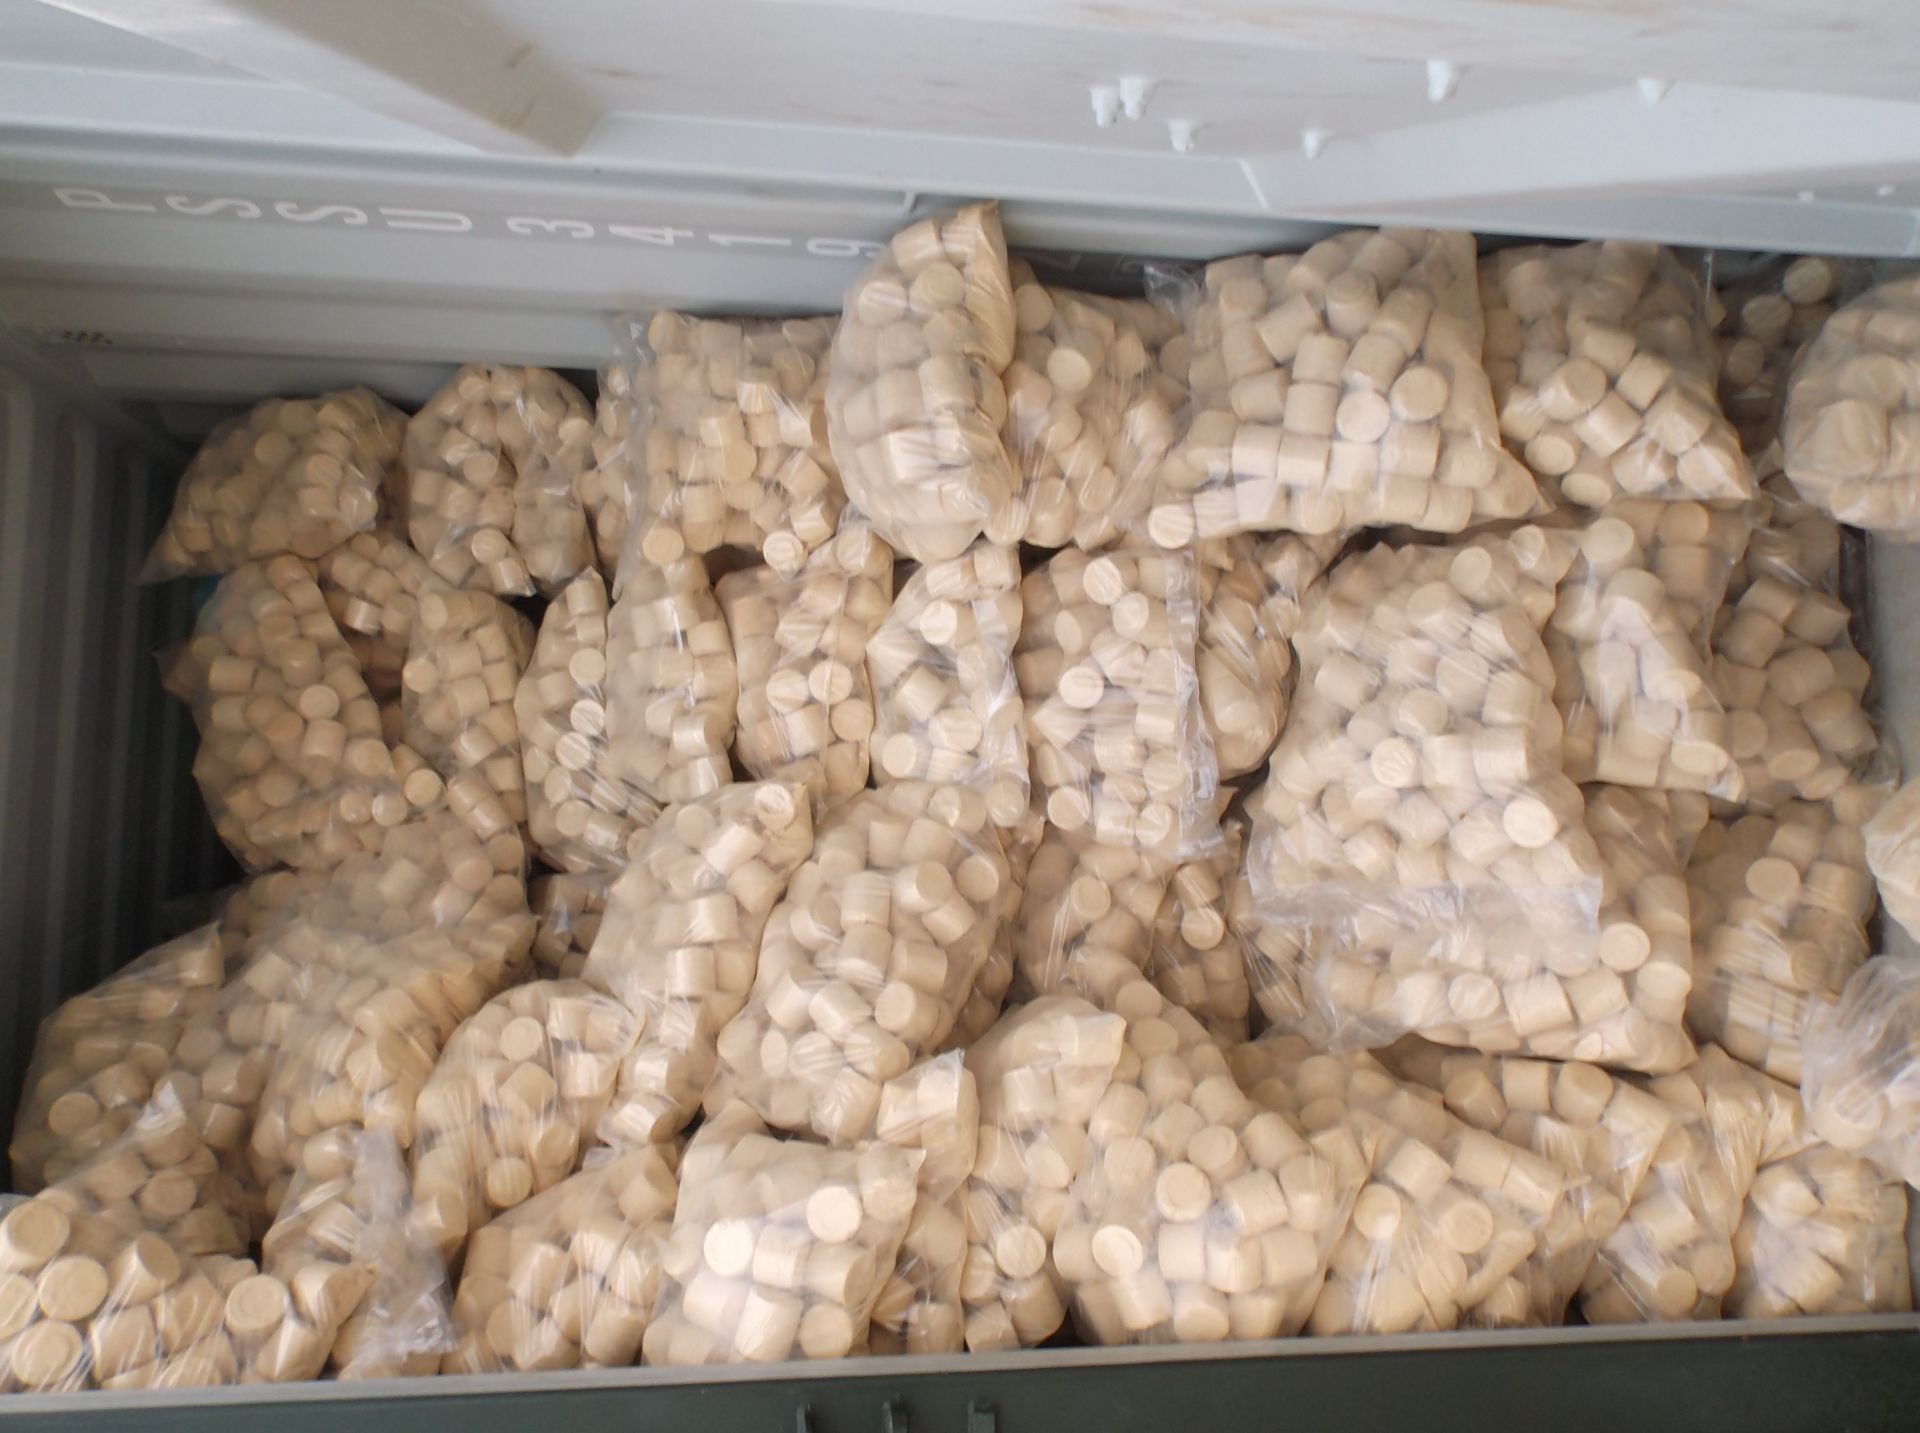 Approx 150 X 8Kg Bags Of Eco Hardwood Briquettes / Heat Logs Eco Stoves Fuel For Aga - Image 3 of 4